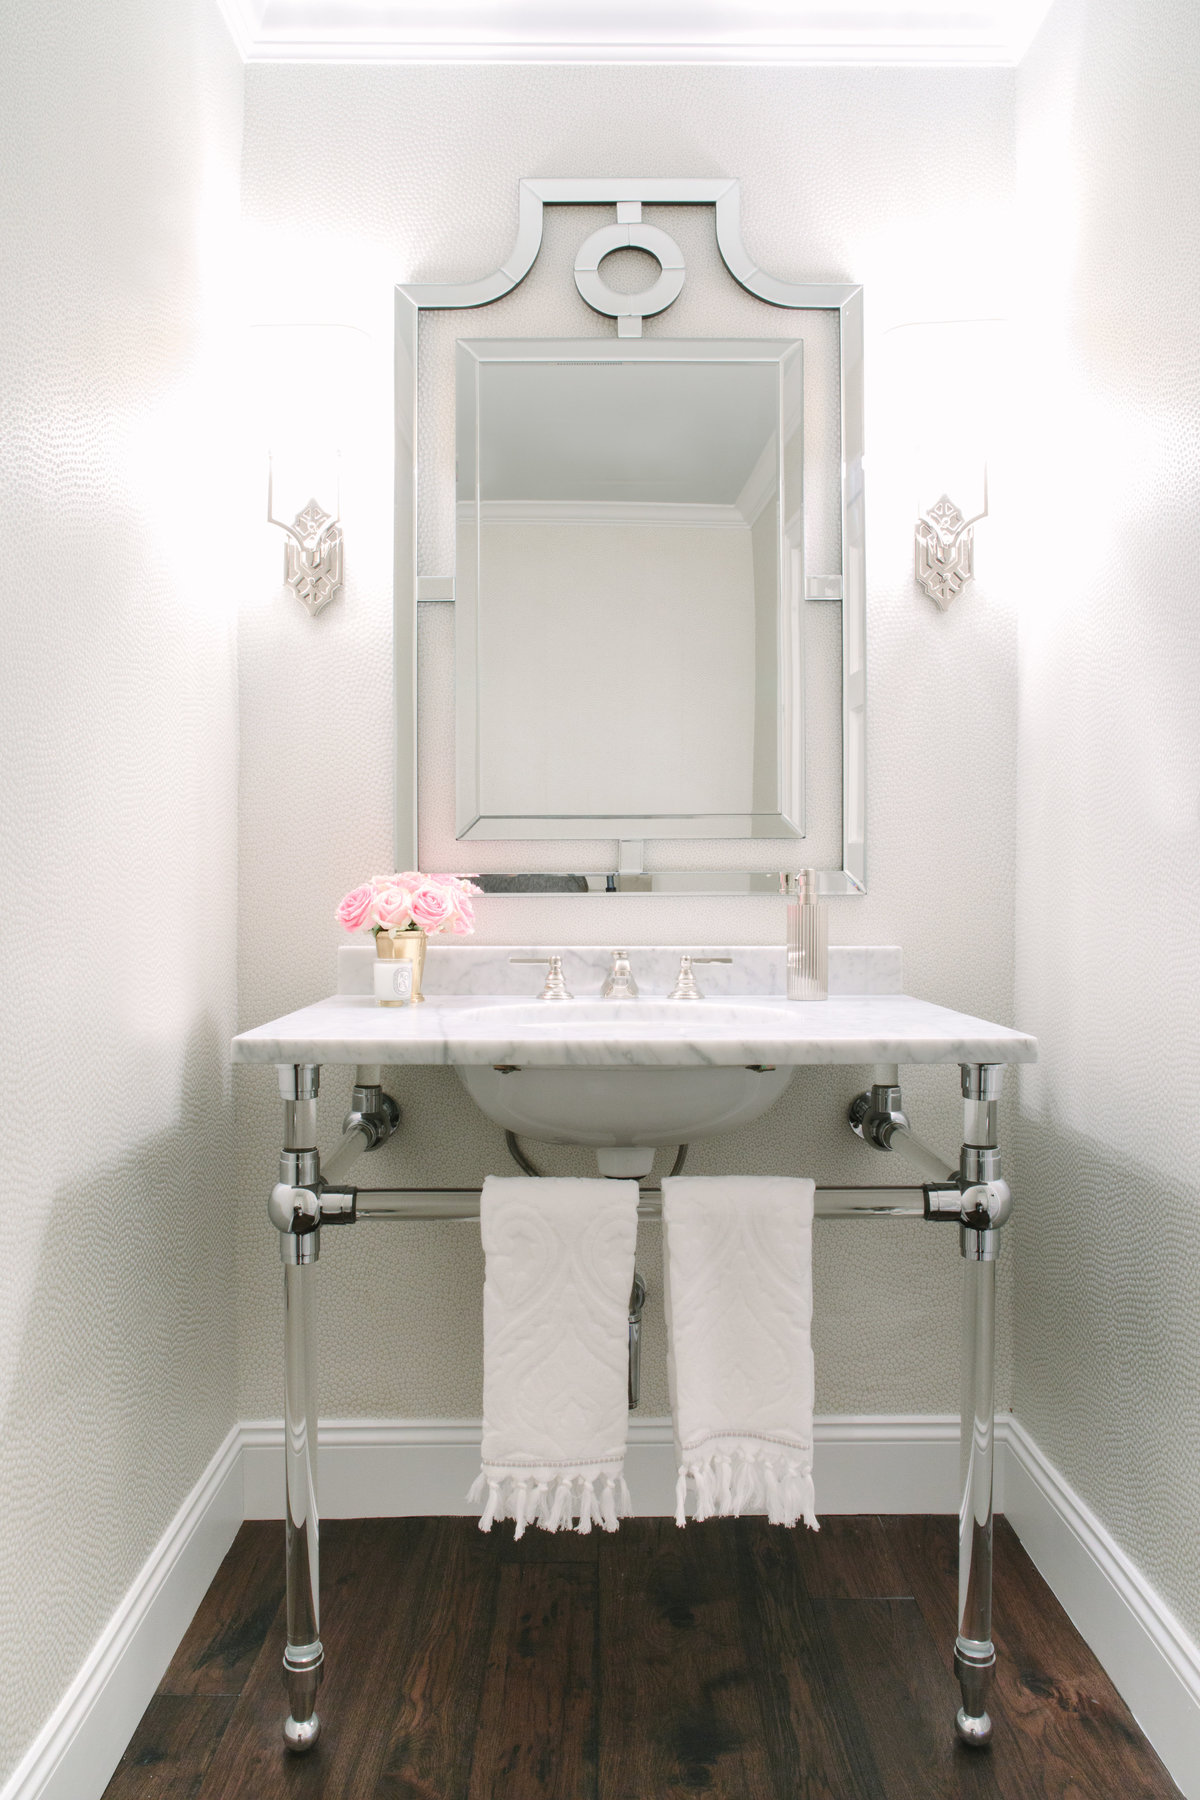 Transitional Powder room interior design with marble counter, Lucite and Polished Nickel washstand style vanity